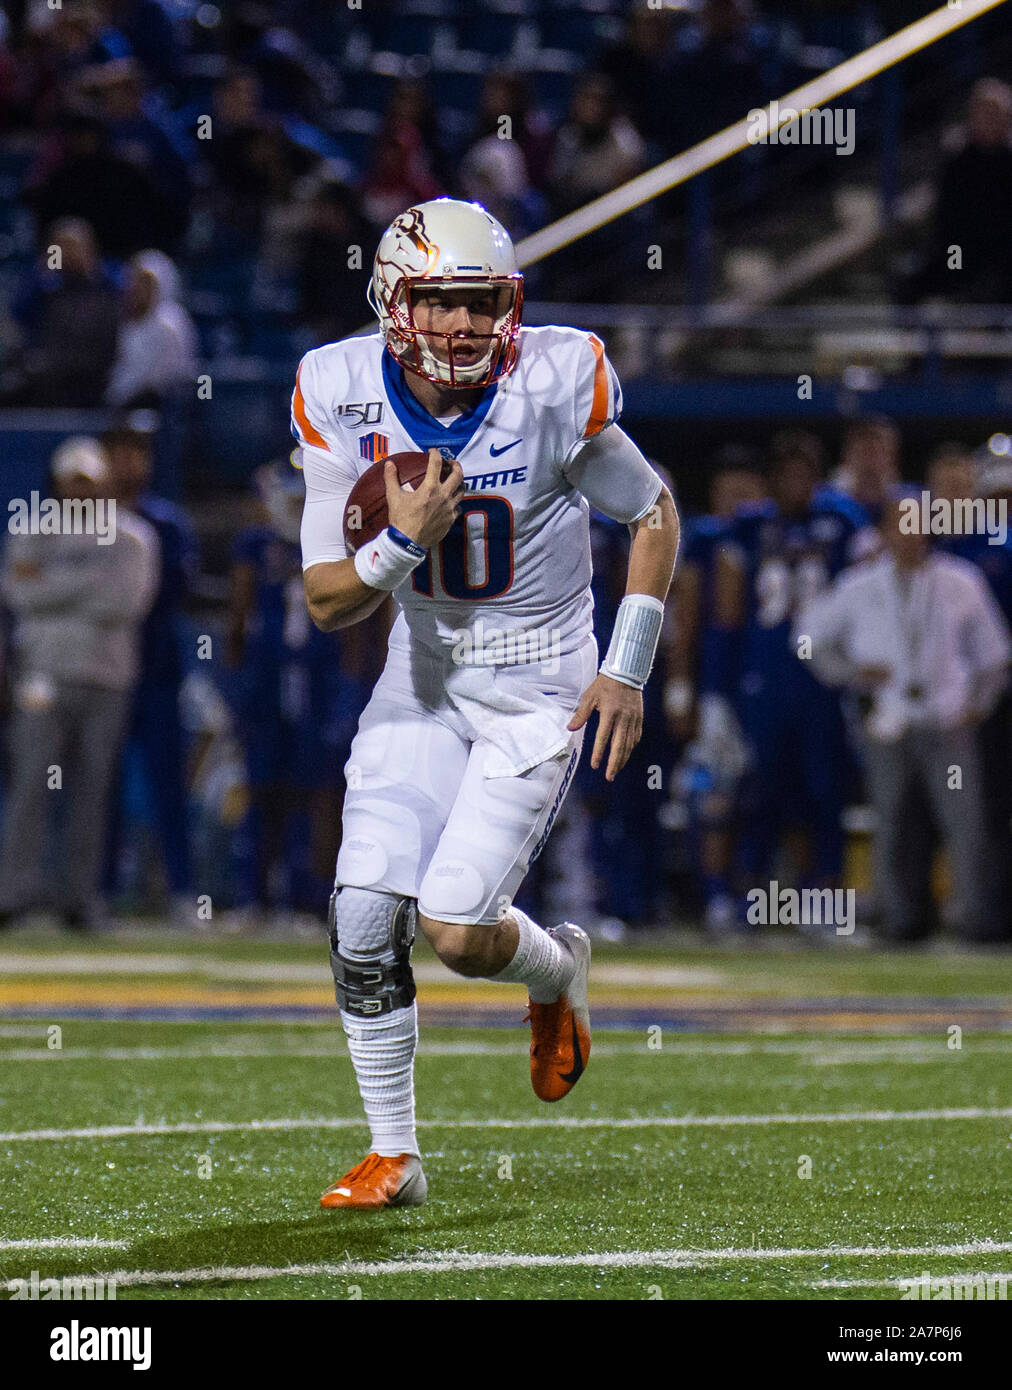 CEFCU Stadium San Jose, CA. 02nd Nov, 2019. San Jose, CA Boise State quarterback Chase Cord (10) runs with the ball and scored during the NCAA Football game between Boise State Broncos and the San Jose State Spartans 52-42 win at CEFCU Stadium San Jose, CA. Thurman James/CSM/Alamy Live News Stock Photo